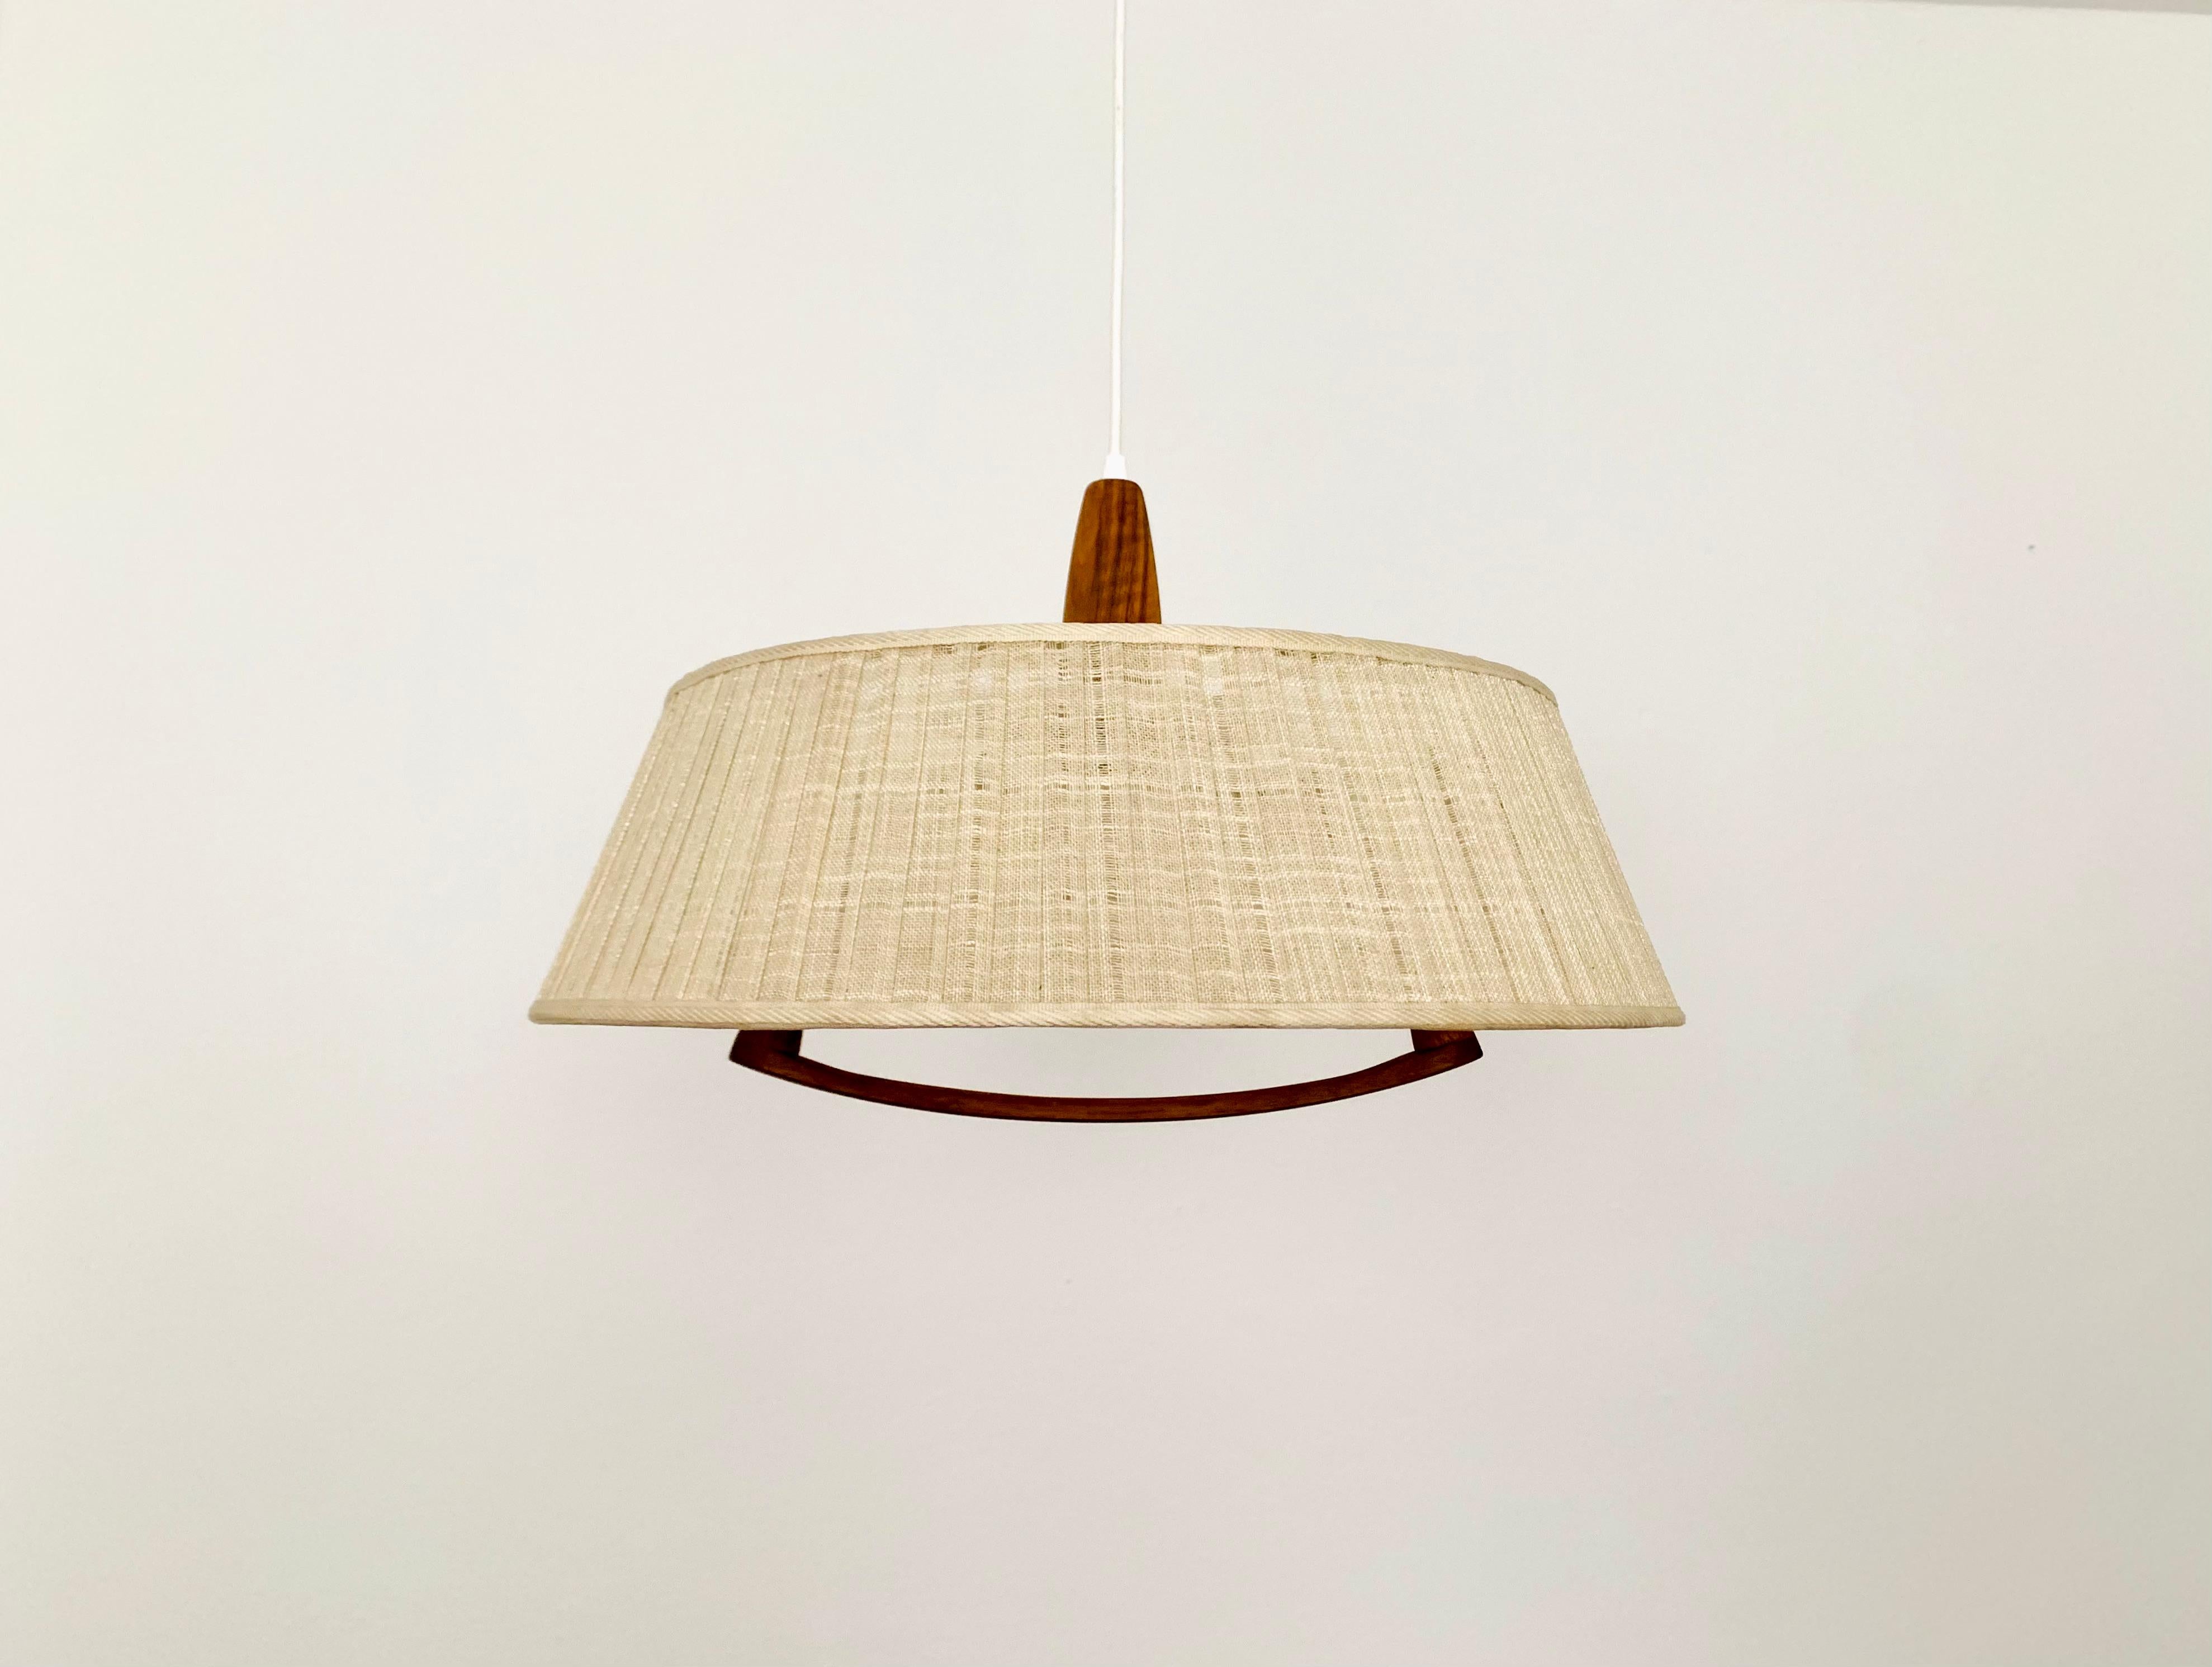 Exceptionally beautiful and large pendant lamp from the 1960s.
The design is very unusual.
The shape and the materials create a warm and very pleasant light.

Manufacturer: Temde

Condition:

Very good vintage condition with slight signs of